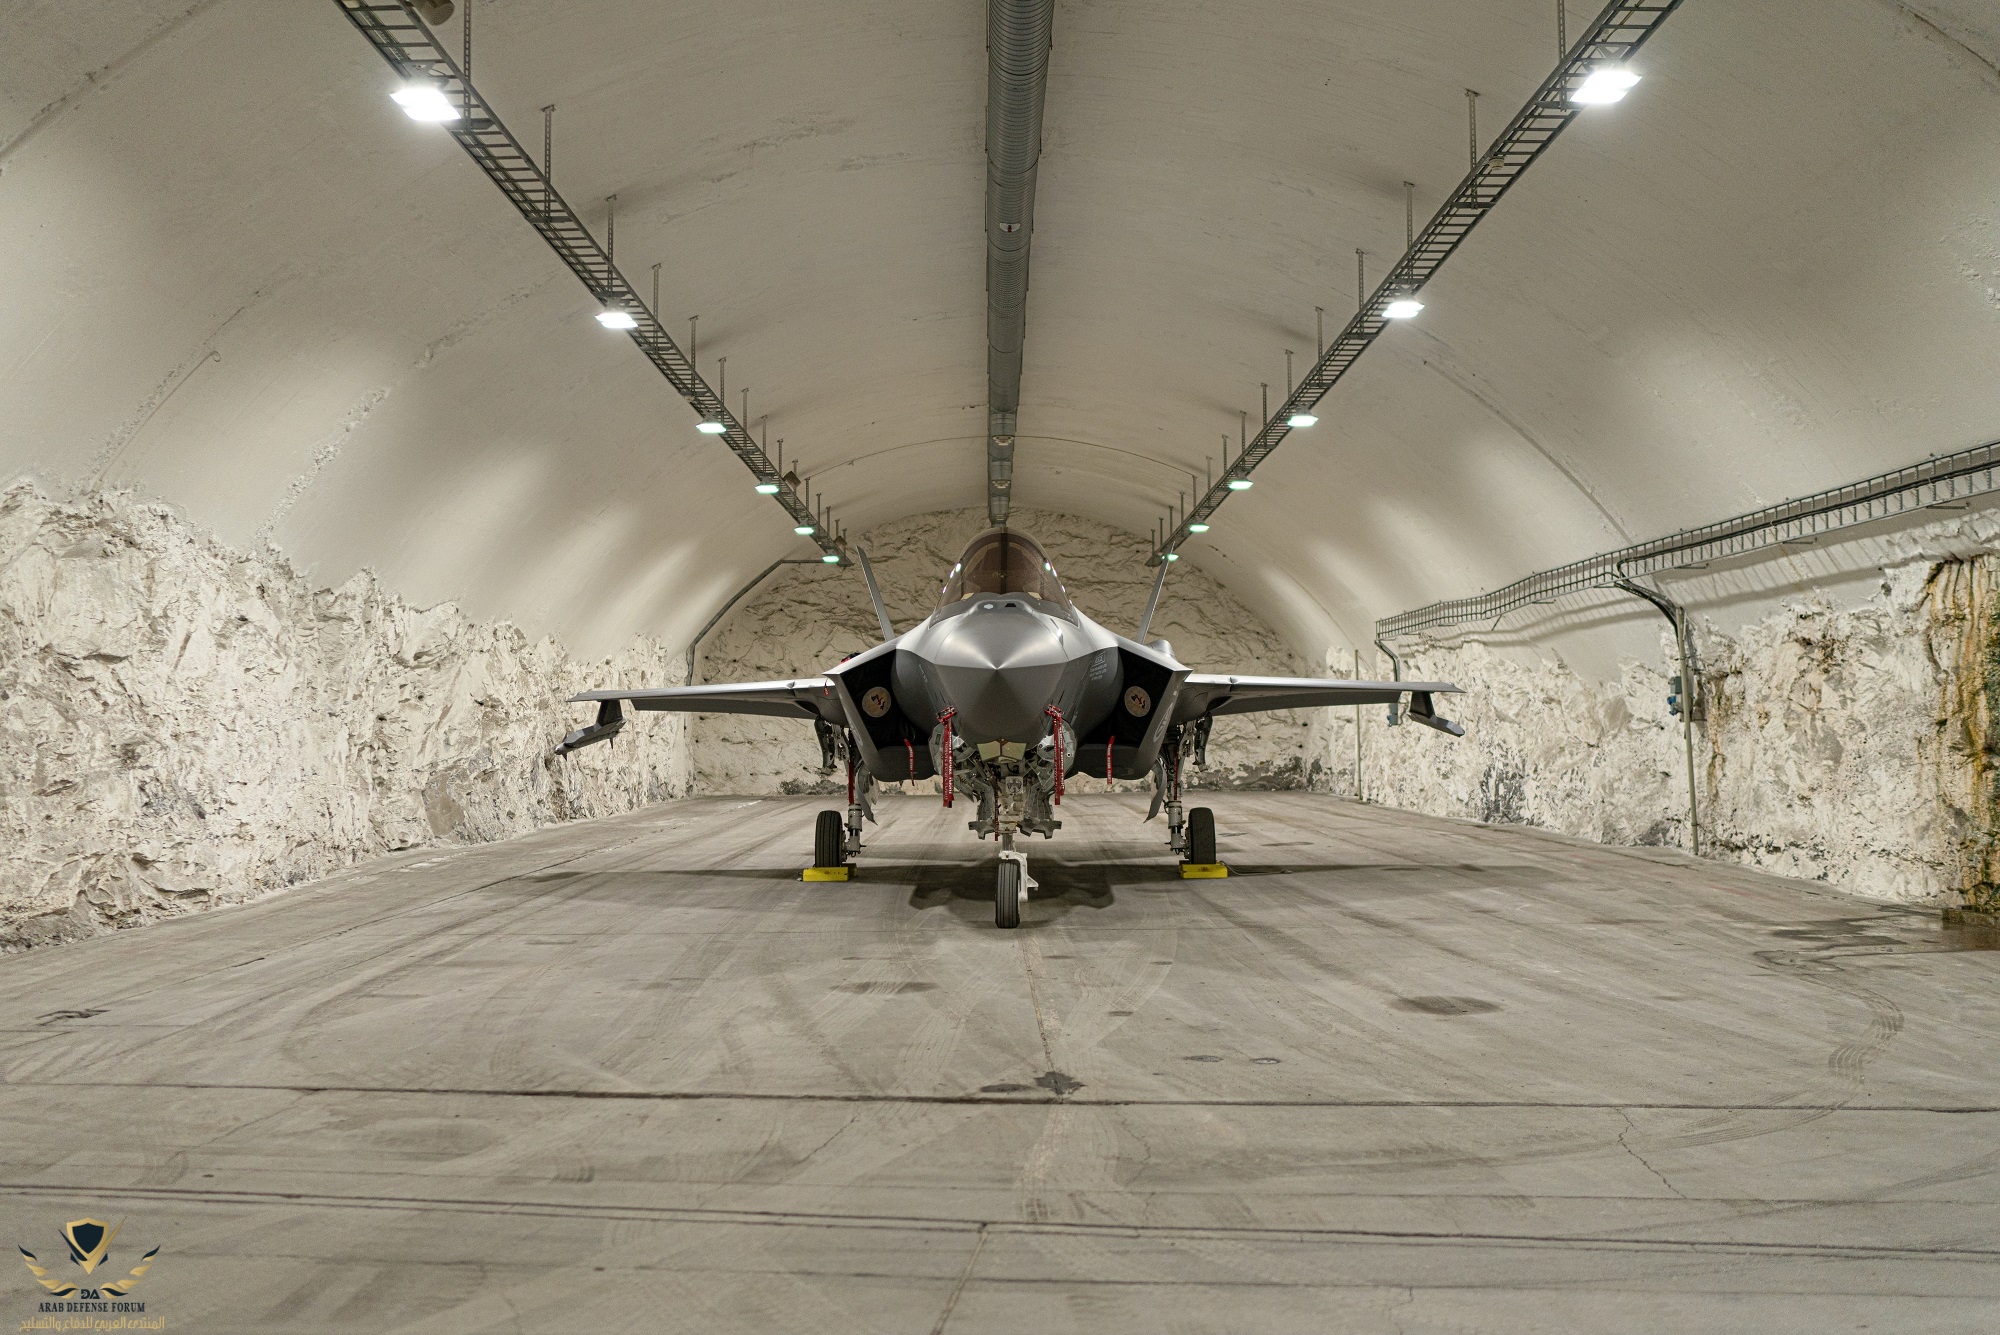 Norway-deploys-F-35-jets-in-reactivated-mountain-base -3.jpg